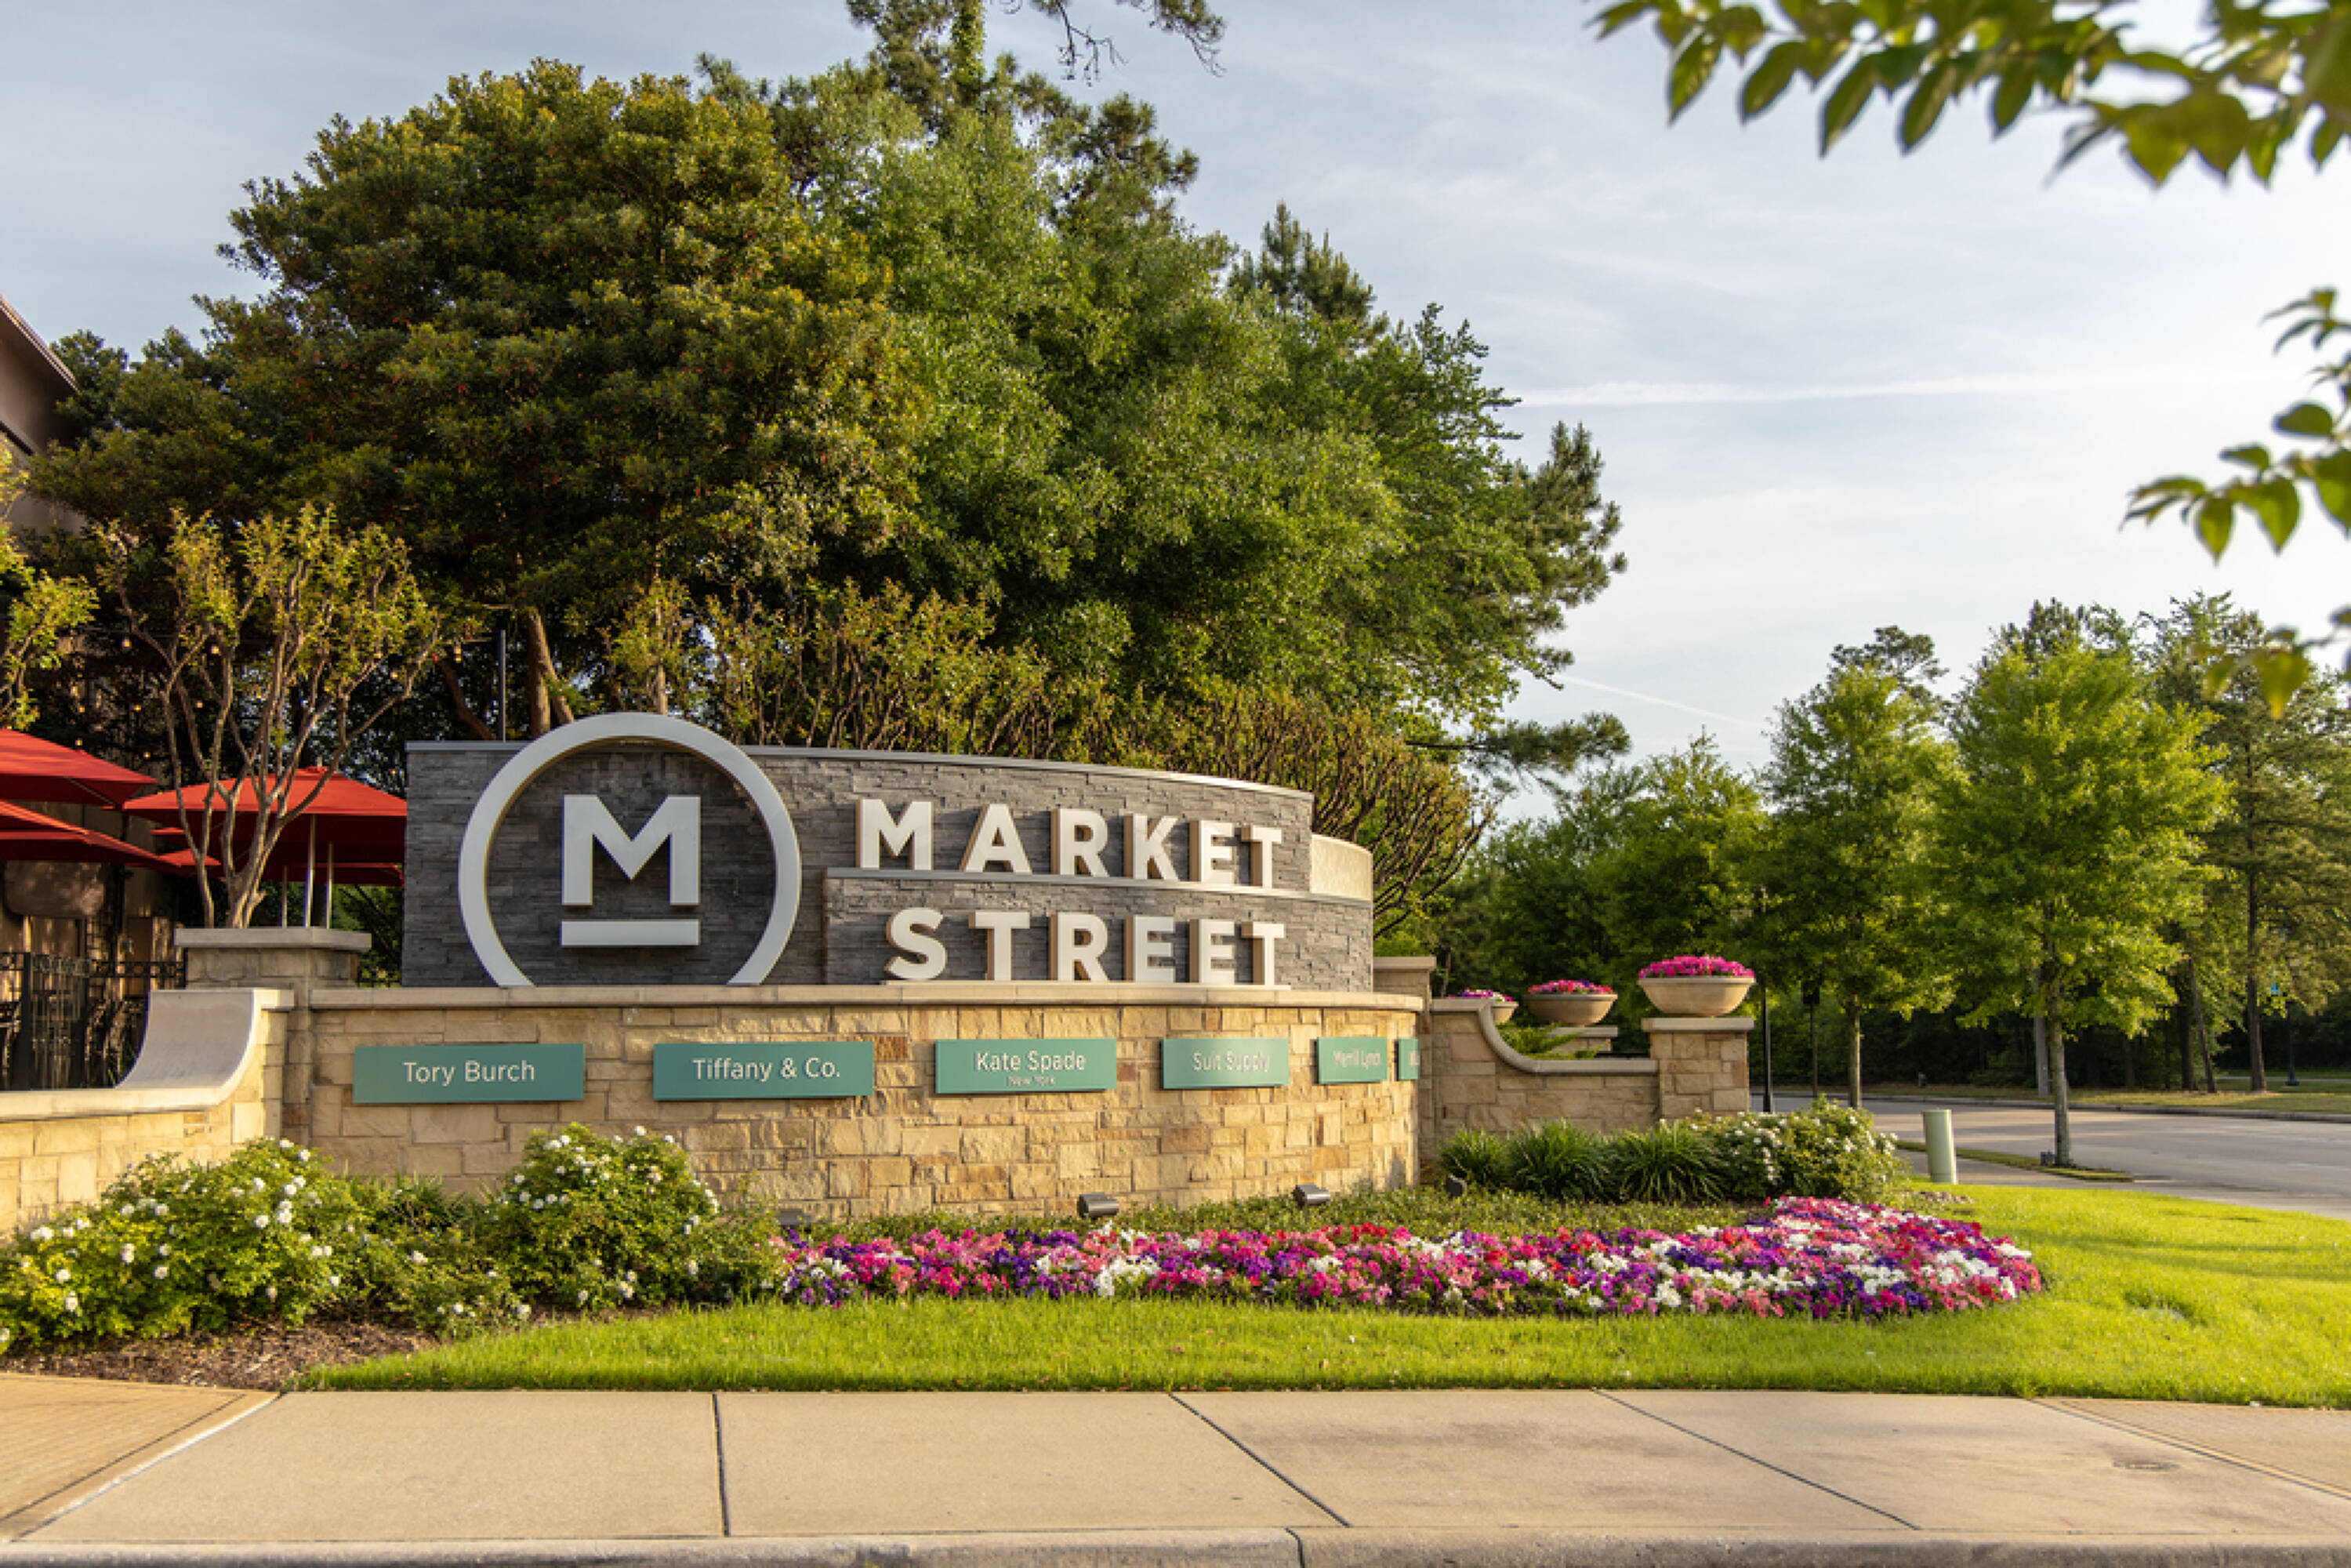 9595 Six Pines Rd, The Woodlands, TX 77380 - Market Street The Woodlands